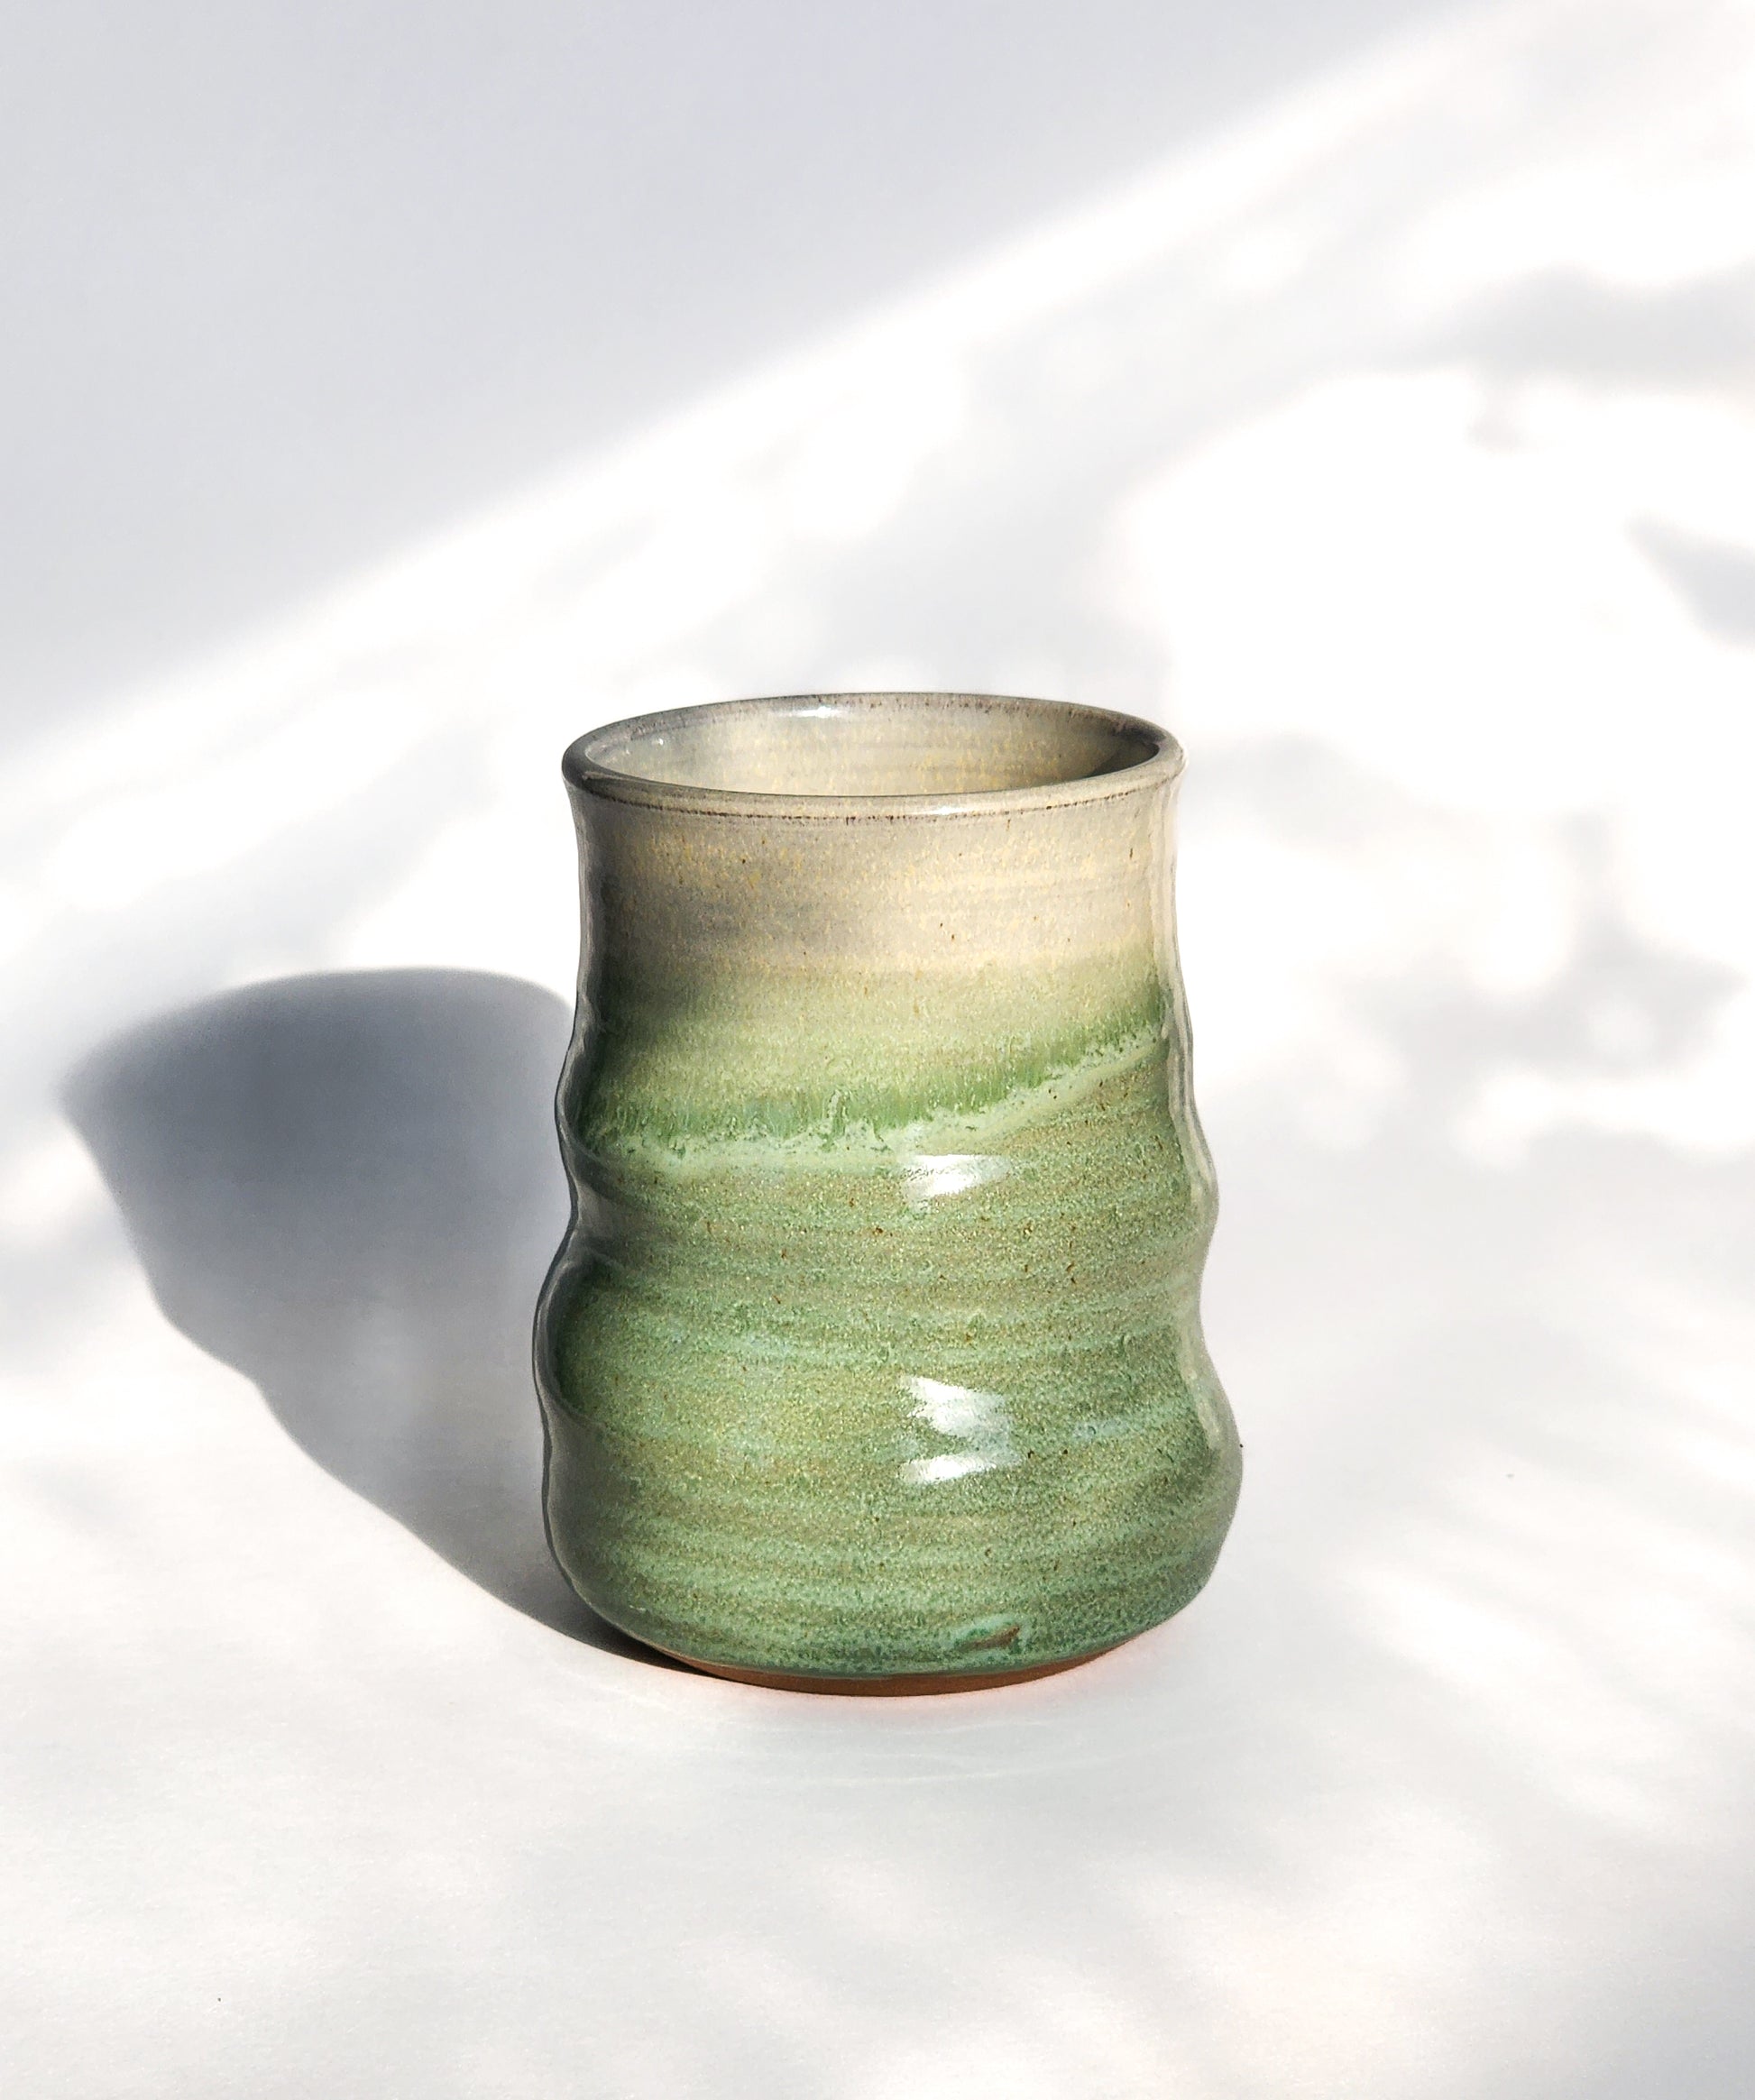 Image: Clinton Pottery's 15 oz Large Tumbler in Light Green – A visually striking addition with a cool, curvy design for a comfortable grip. This machine washable tumbler, crafted with care, adds contemporary elegance. The invigorating Light Green color brings a touch of nature's vitality, reminiscent of spring foliage and sunlit meadows.